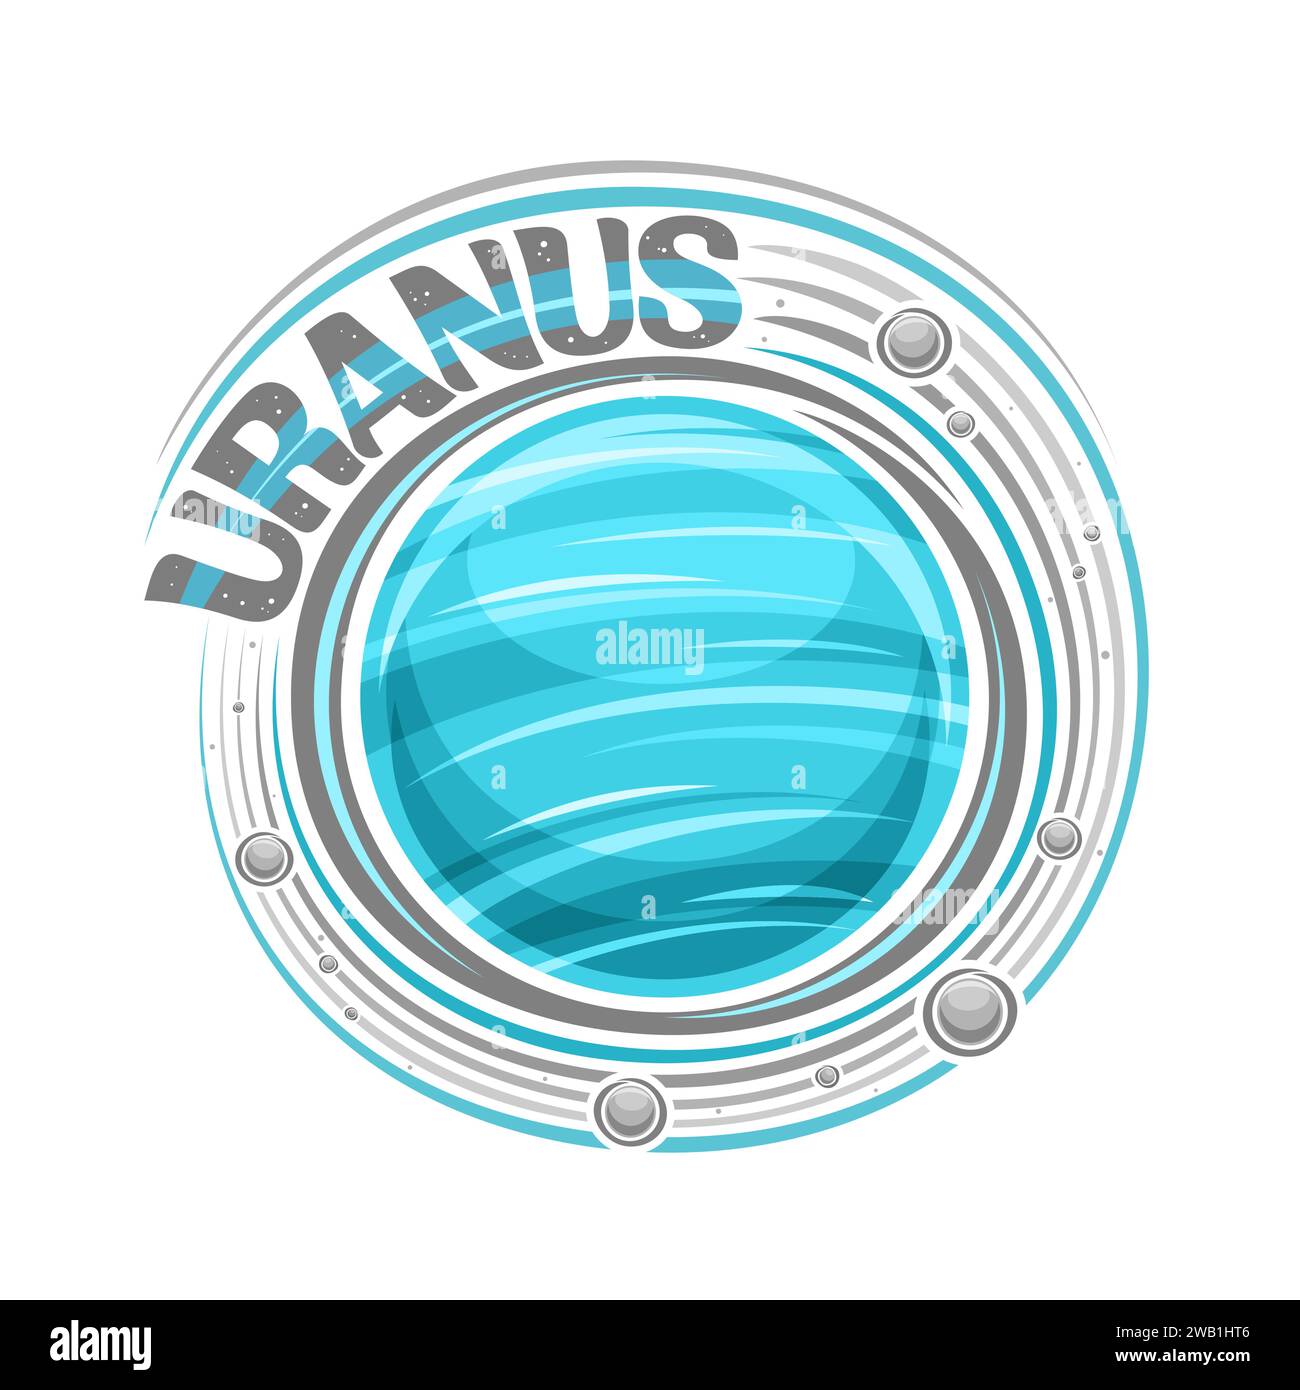 Vector logo for Uranus, decorative cosmic print with rotating planet uranus and many moons, gas windy surface, blue cosmo sticker with unique brush le Stock Vector